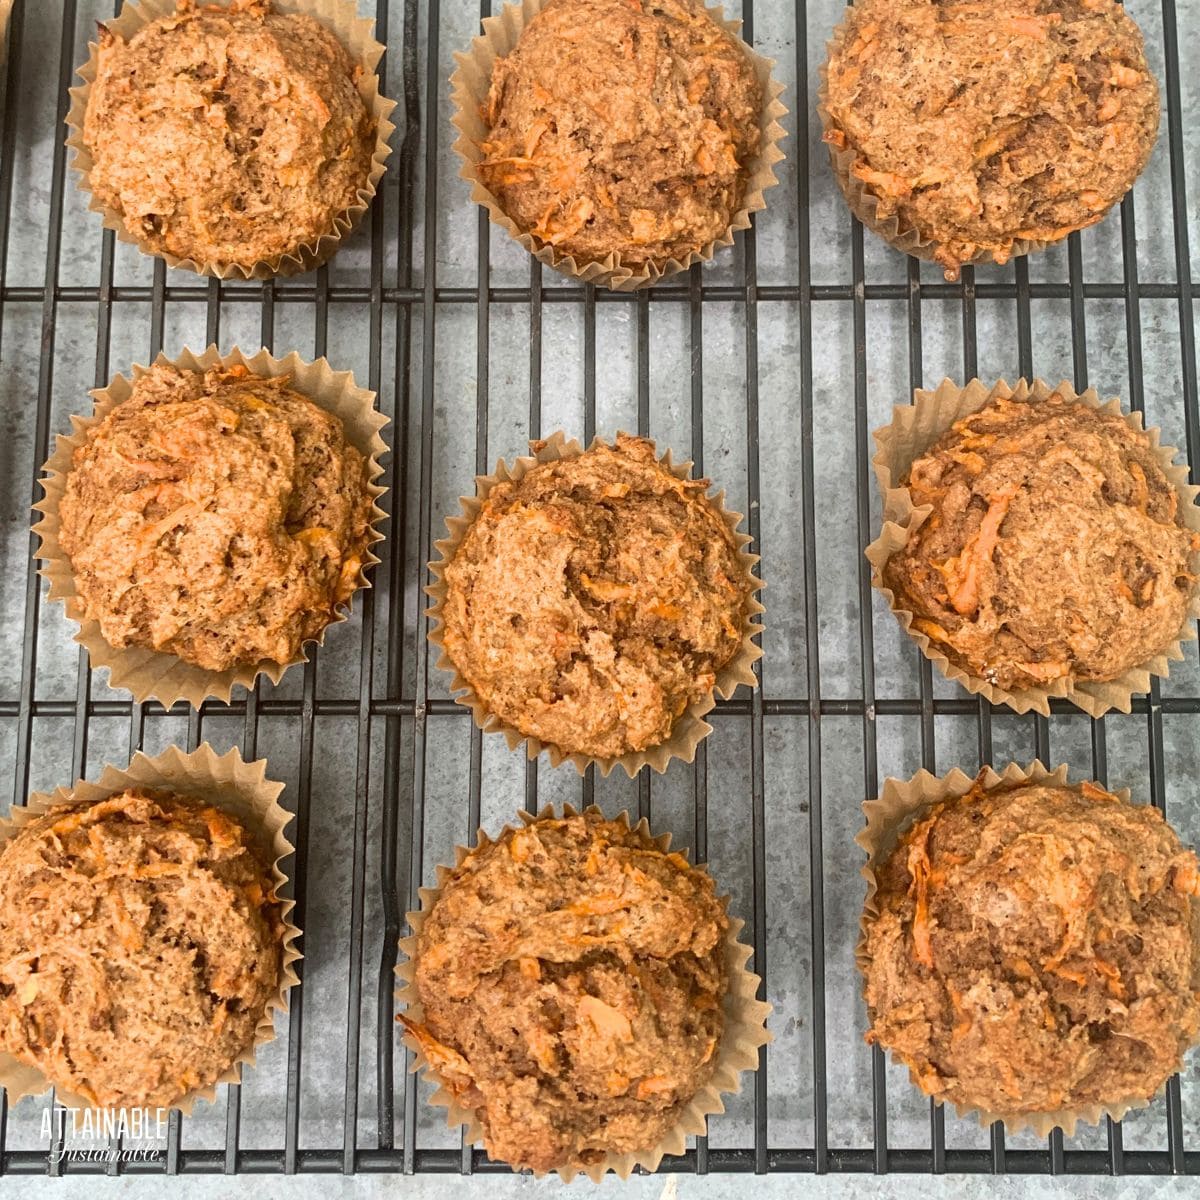 muffins on a cooling rack.